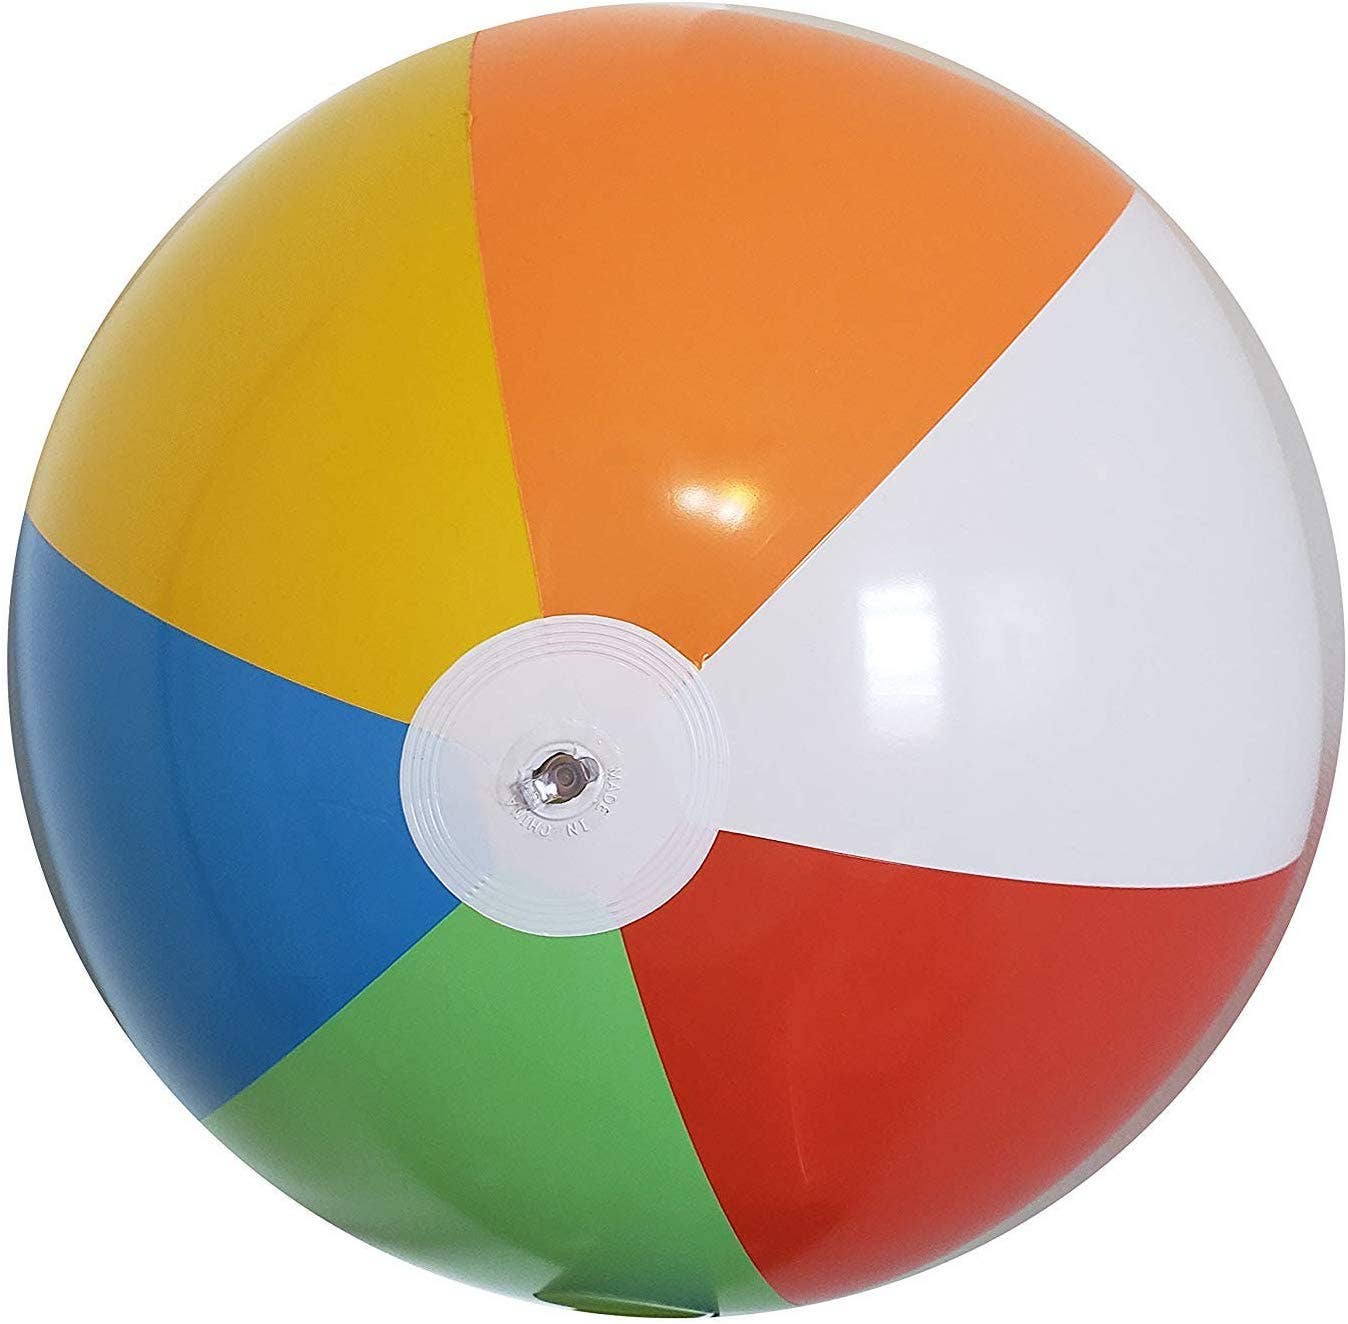 Large online sales durony 193 Pieces Beach Ball Birthday Party